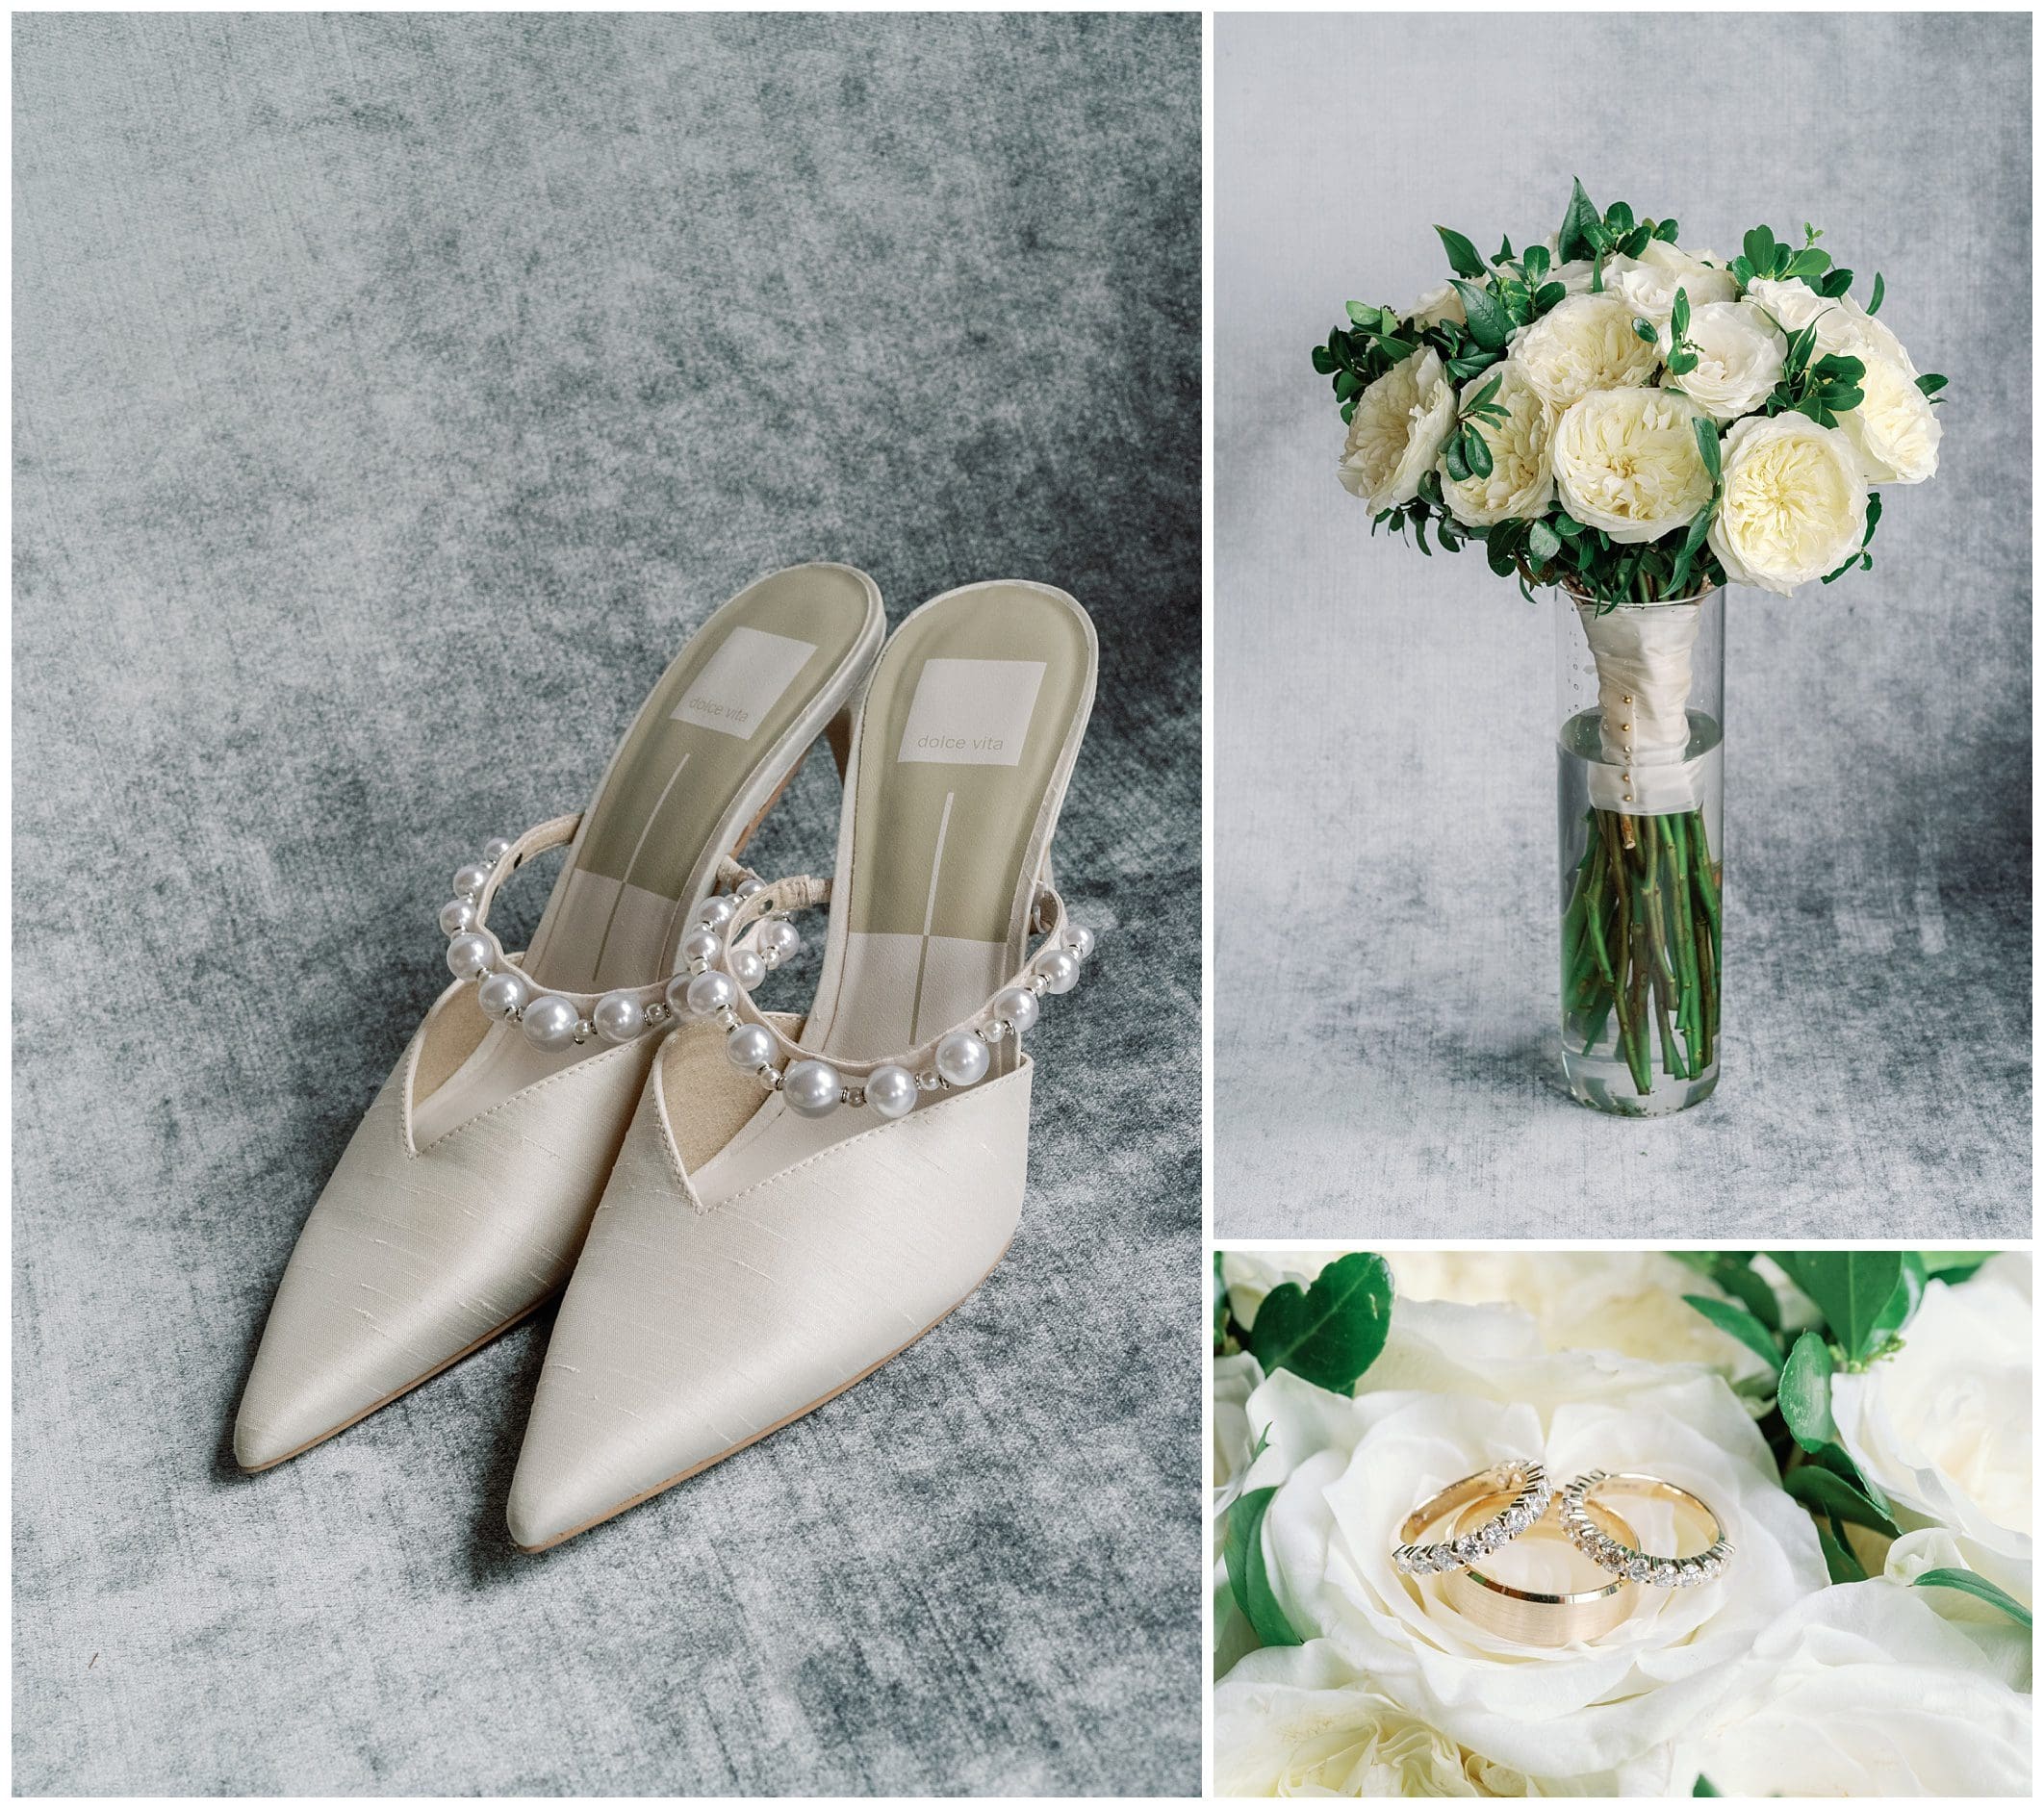 Elegant wedding accessories: ivory pointed-toe flats with pearl embellishments, a bouquet of white roses and greenery, and gold wedding bands nestled among white flowers.